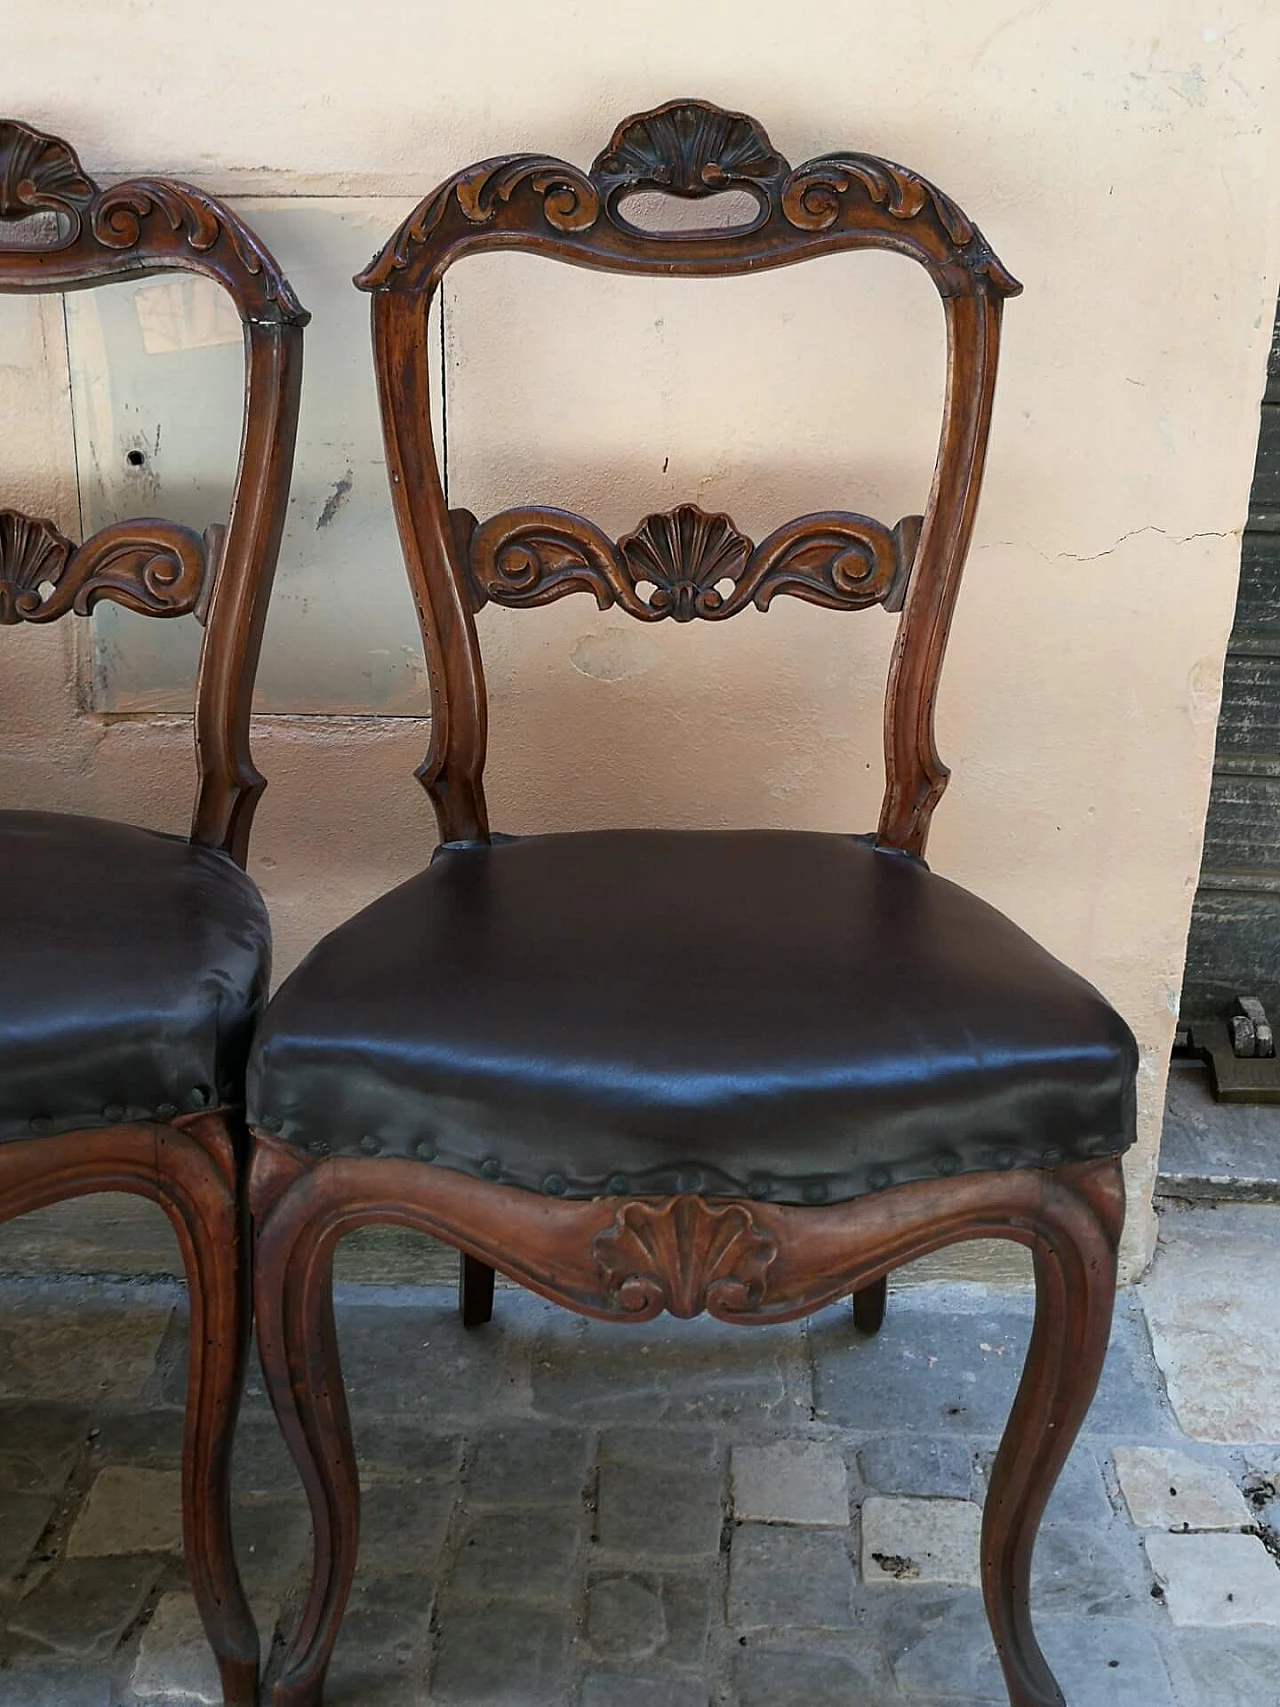 6 Louis XVI walnut chairs with leather covers, Veneto, late 18th century 1310496